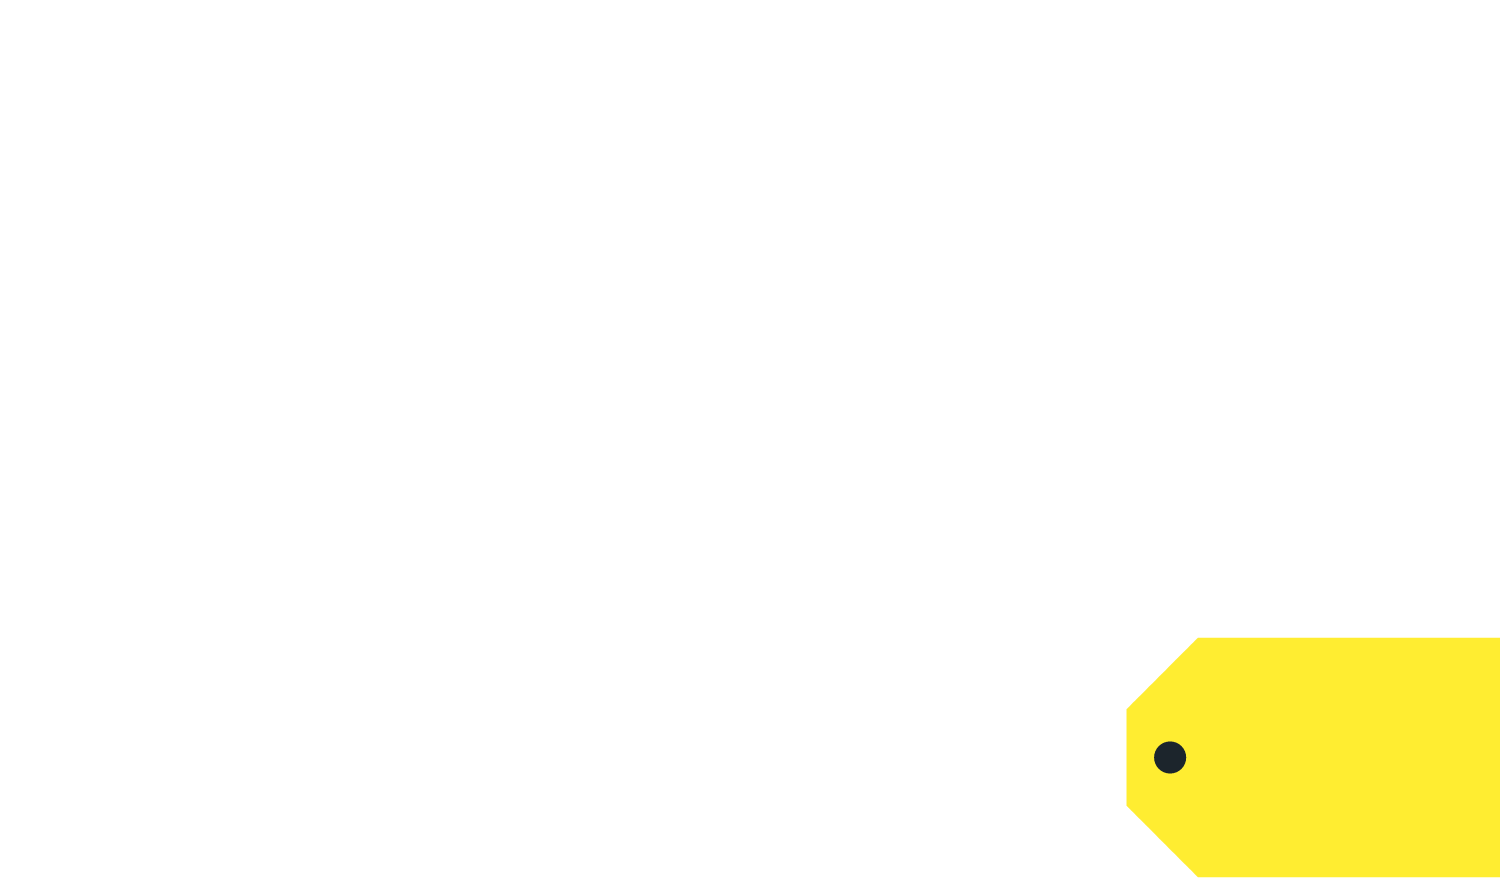 Best Buy logo in transparent PNG and vectorized SVG formats